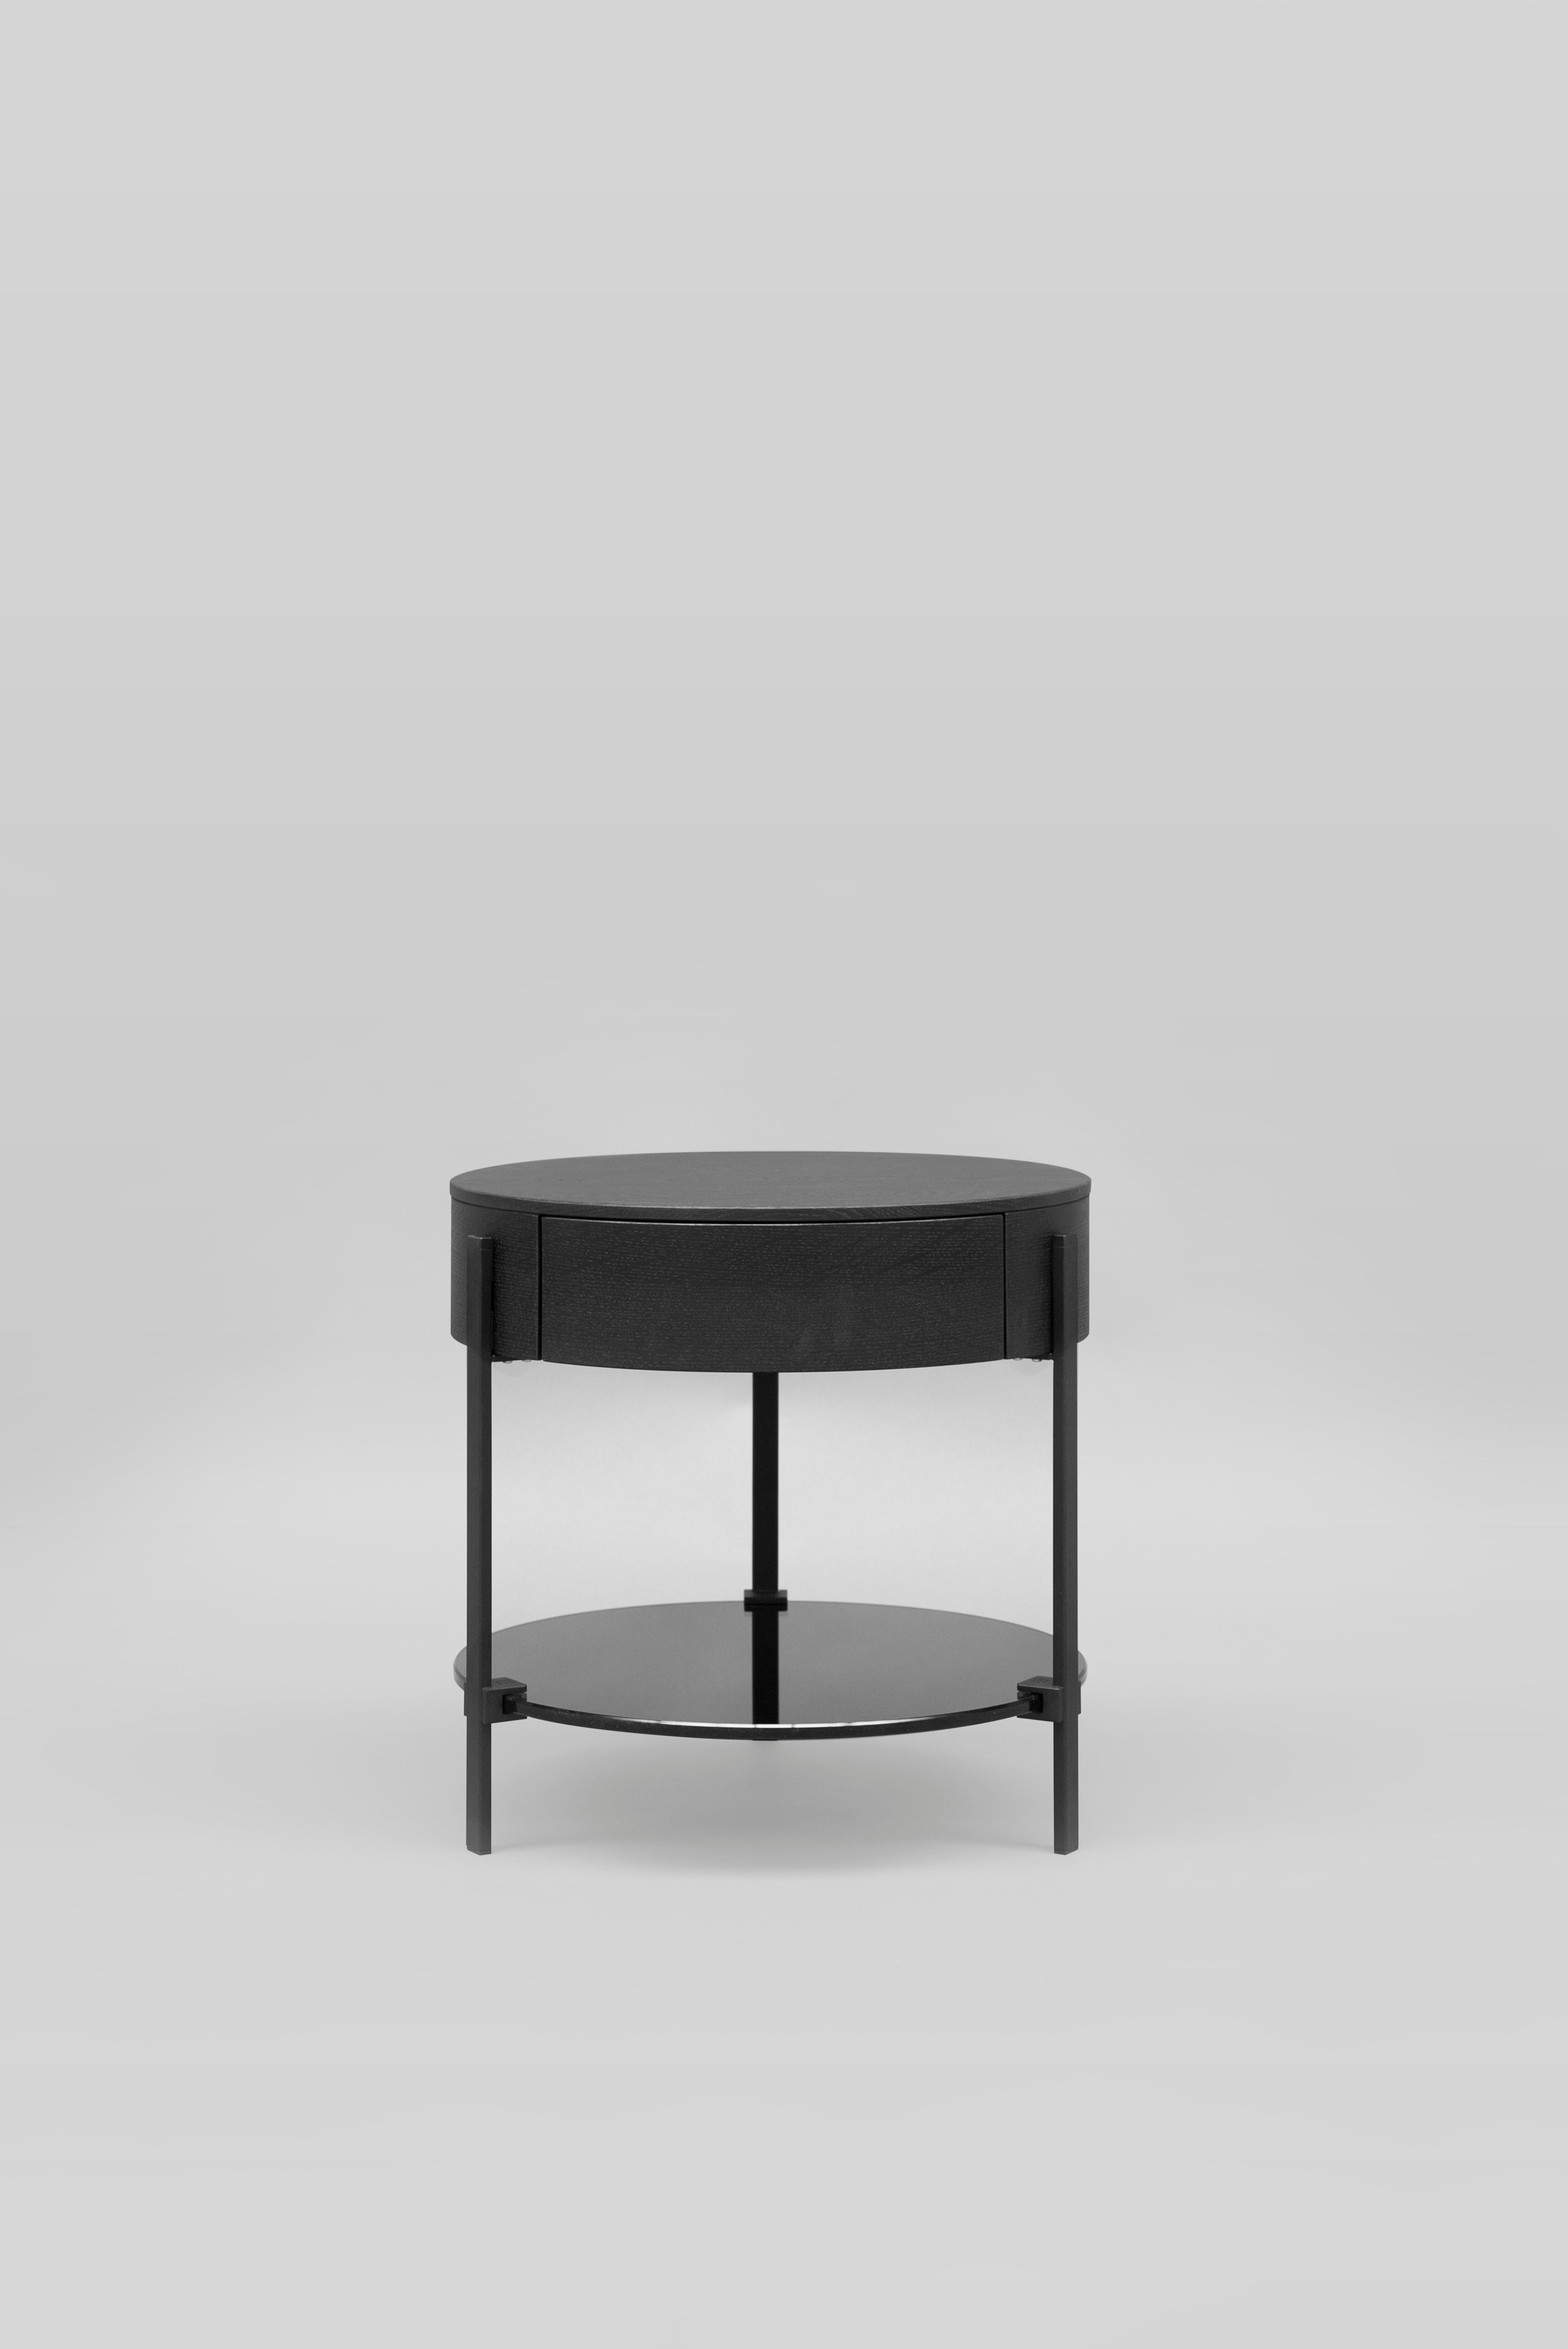 The 21st century Alice T79L side table was designed by Peter Ghyczy in 2015 and hand-crafted in the GHYCZY atelier in the south of the Netherlands, with a select group of artisans. The Alice T79L side table features a minimalist metal frame of